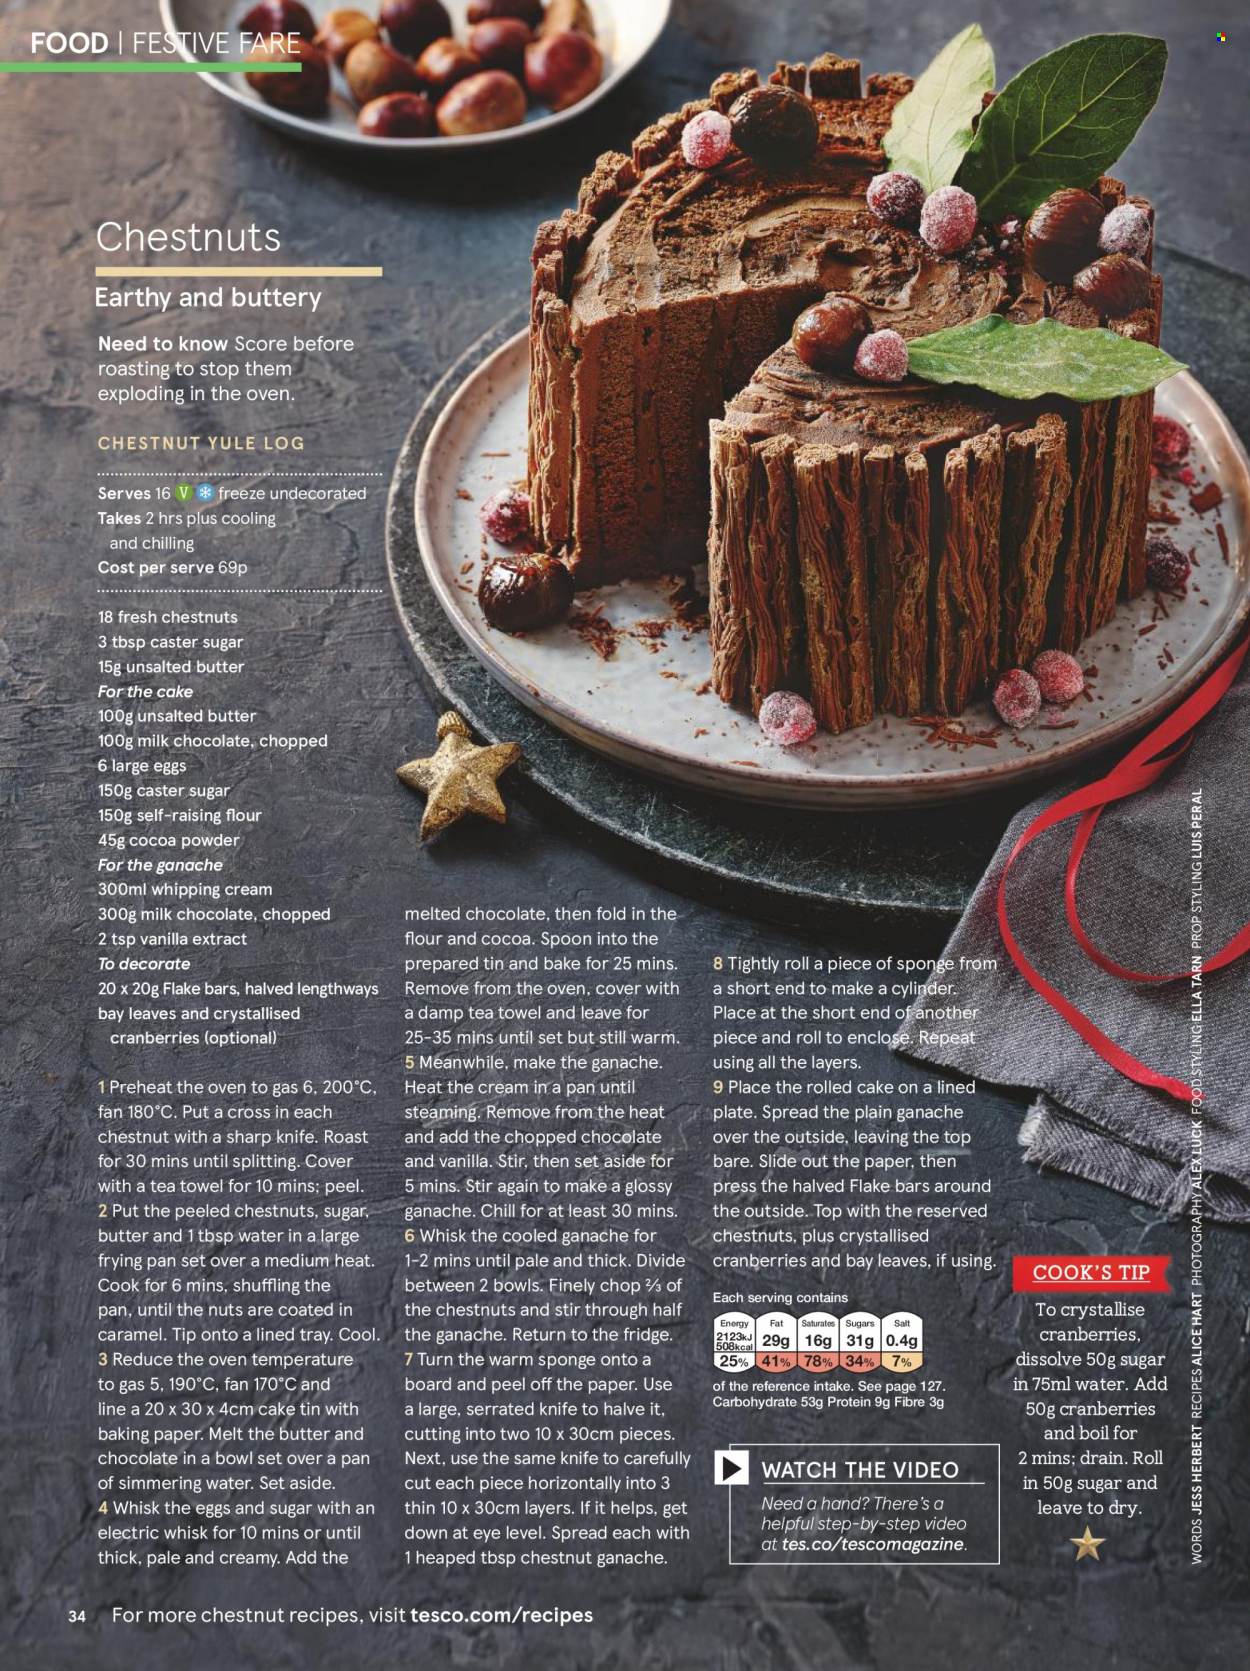 thumbnail - Tesco offer  - Sales products - Cook's, large eggs, whipping cream, milk chocolate, flour, vanilla extract, cranberries, caramel, chestnuts, knife, sponge, spoon, tray, plate, pan, baking paper, bowl set, tea towels. Page 36.